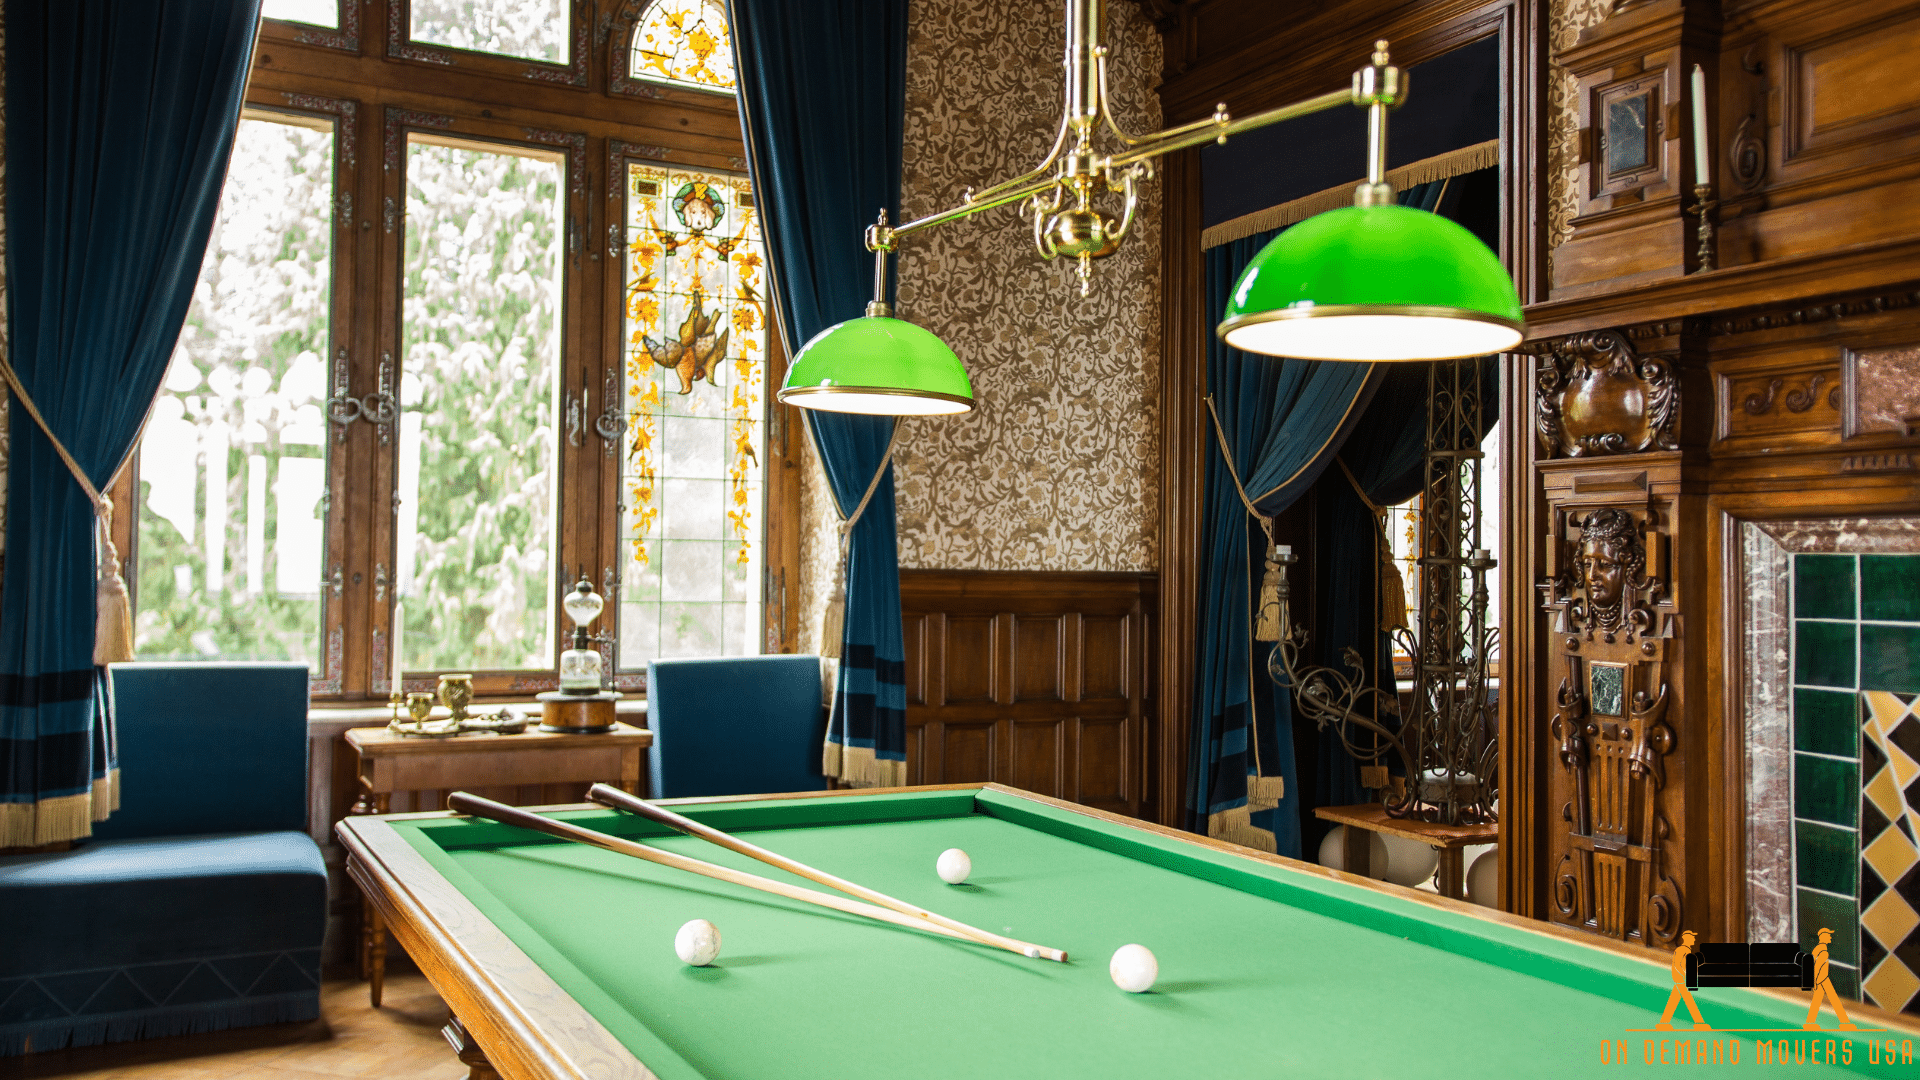 Pool Table Movers Companies in DuPage County Illinois